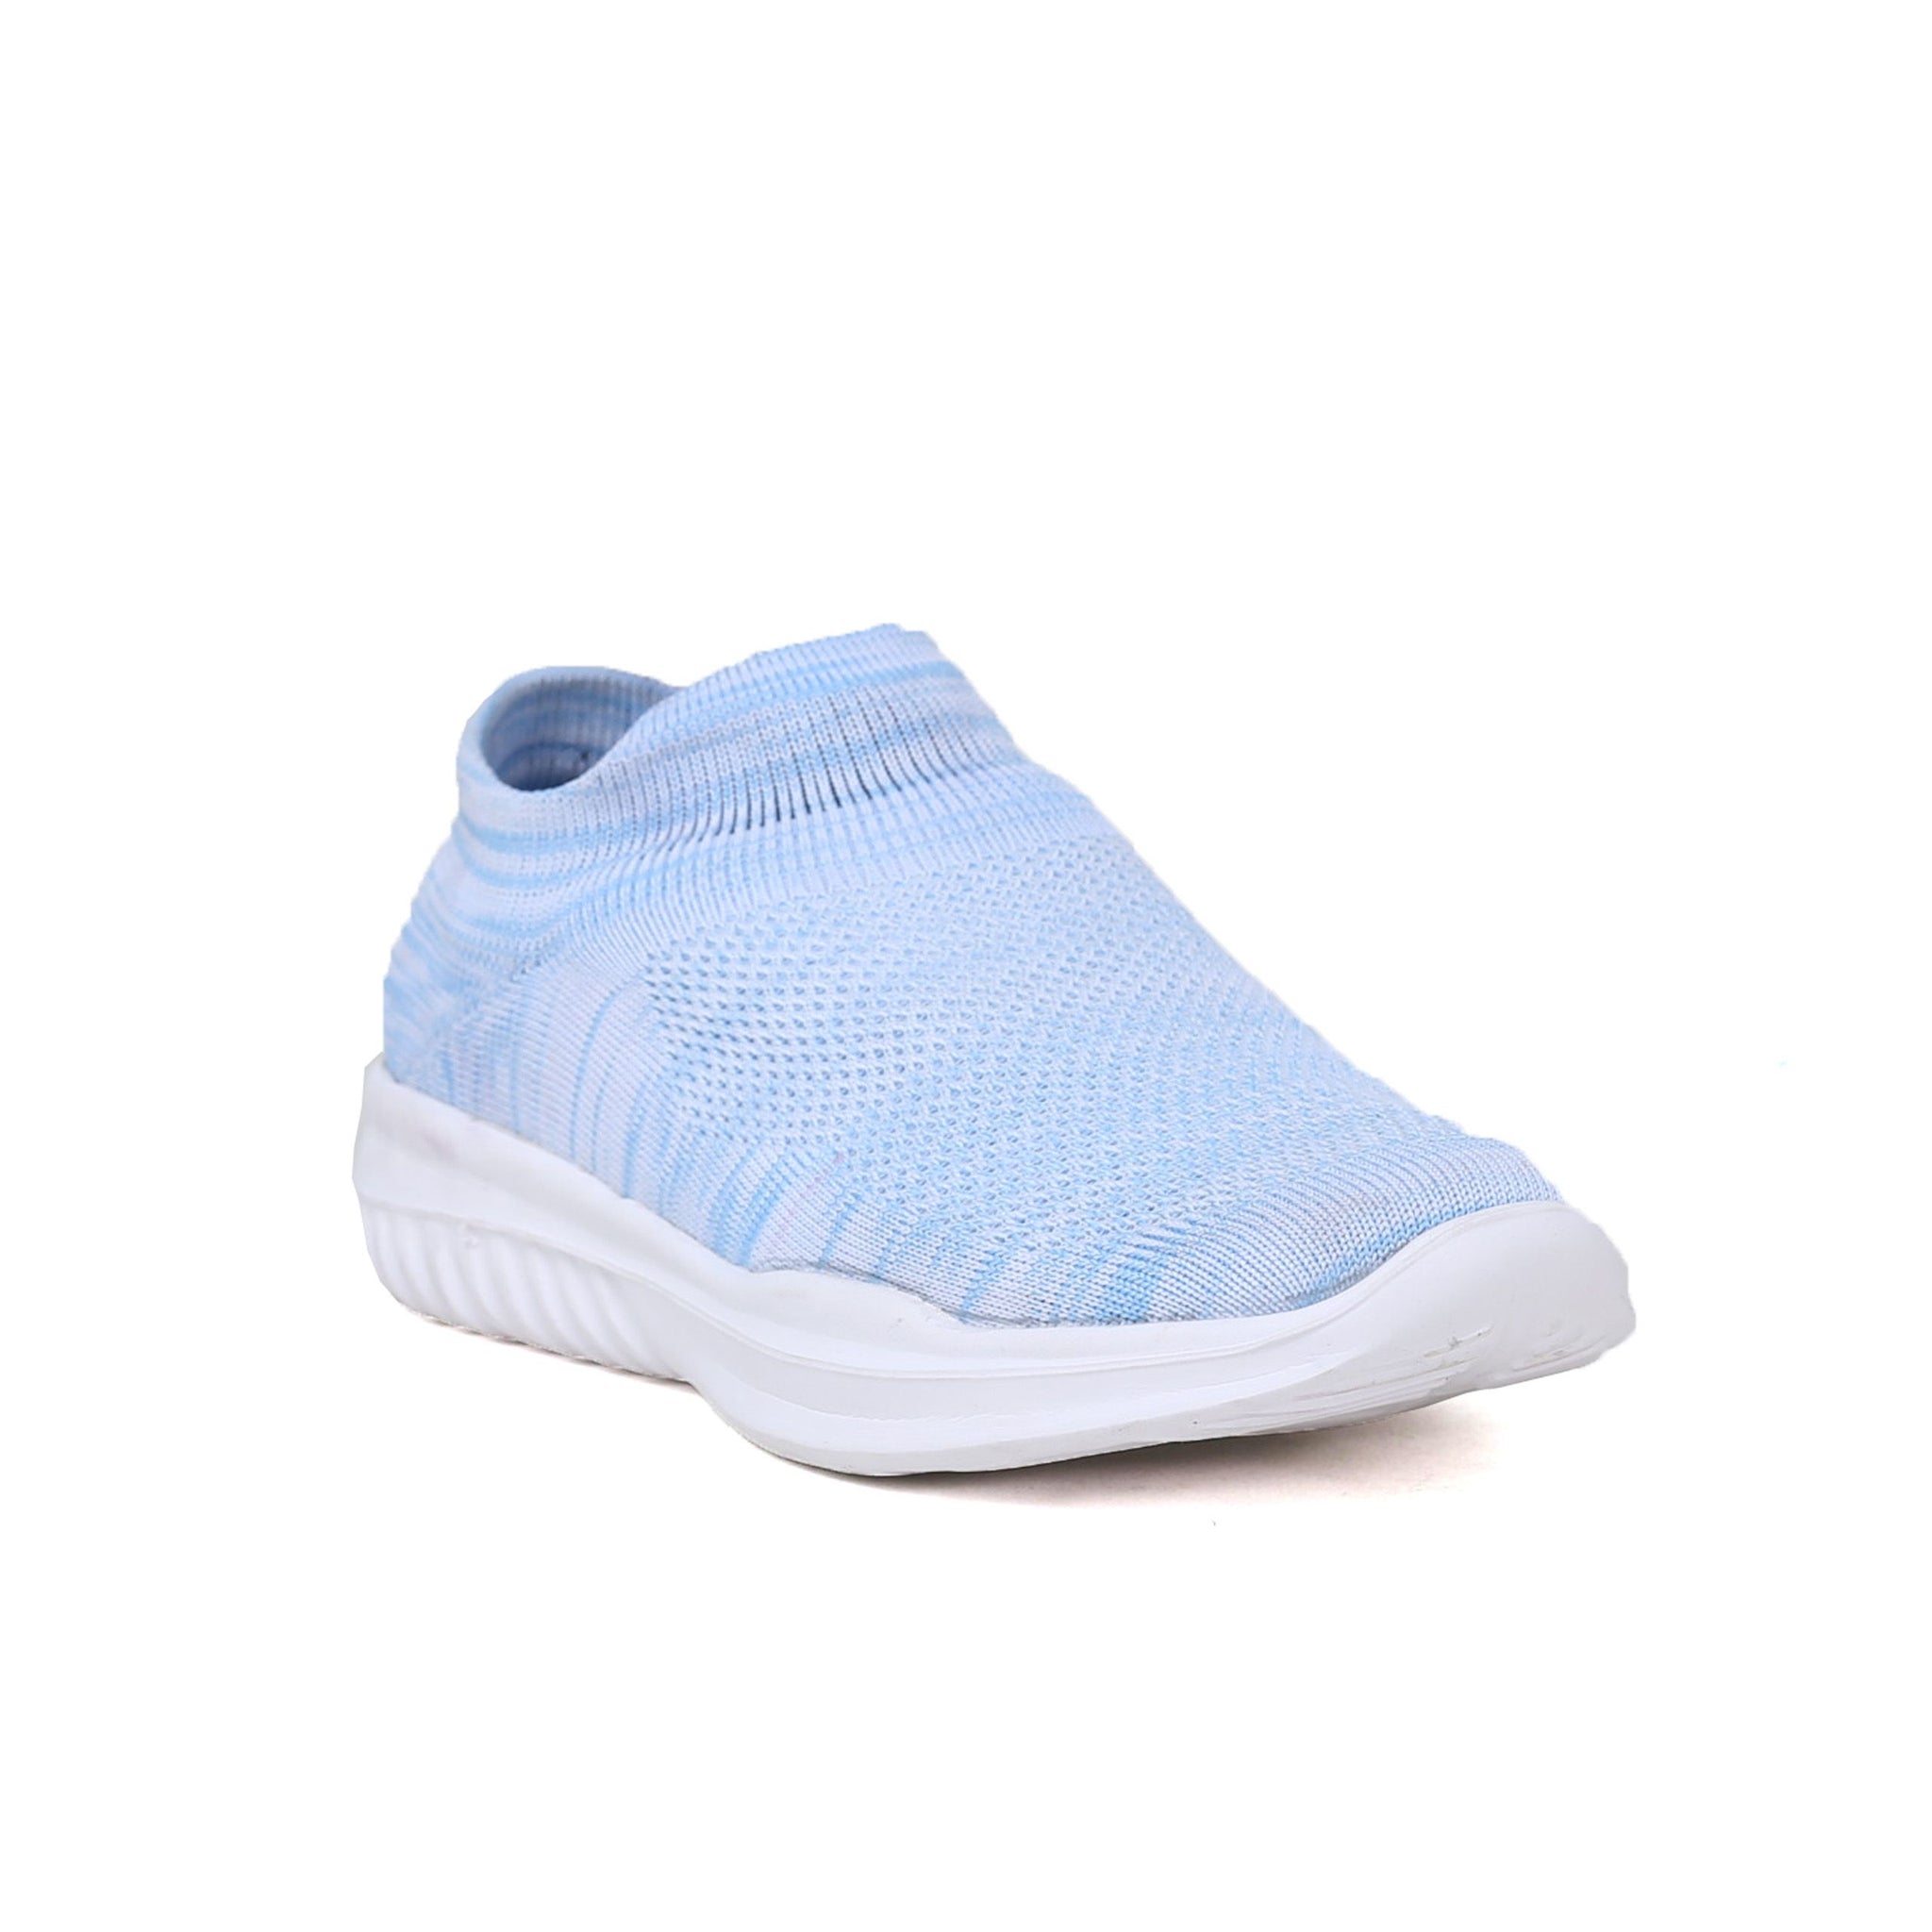 mr voonik casual shoes - Latest trends 